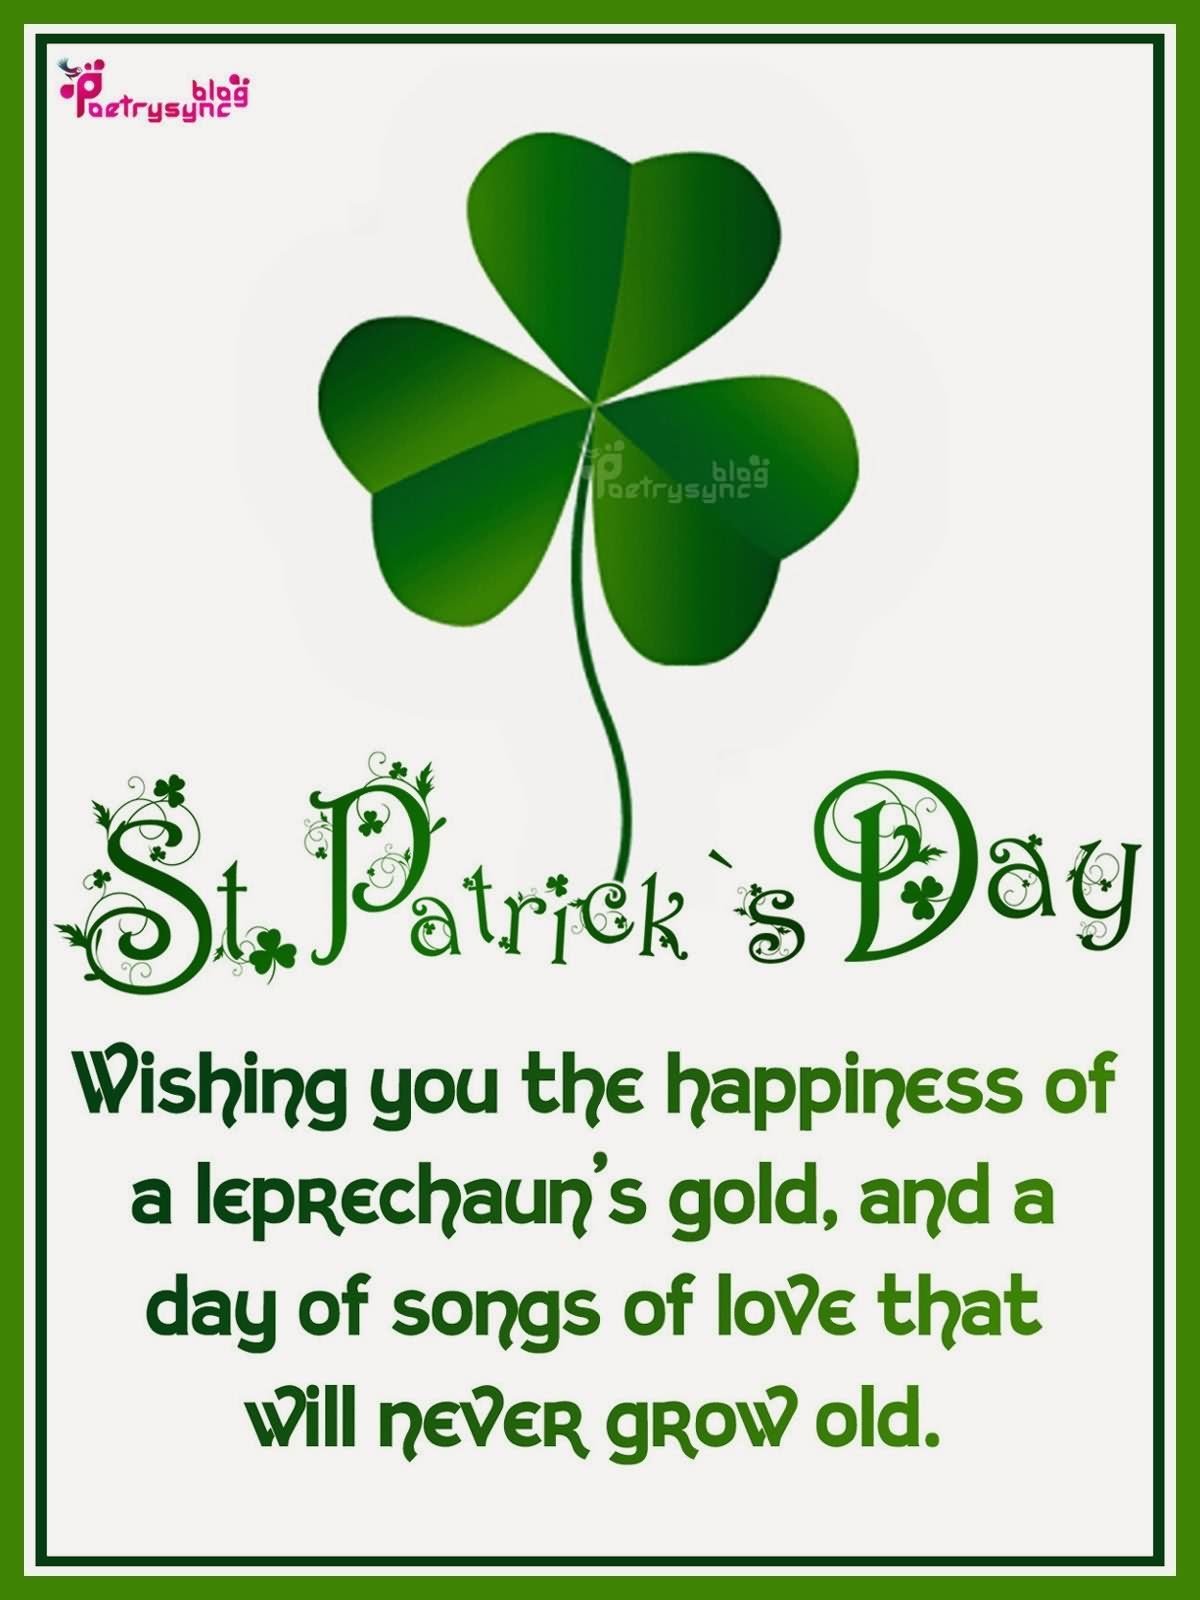 Lots of love happy saint patrick's day wishes